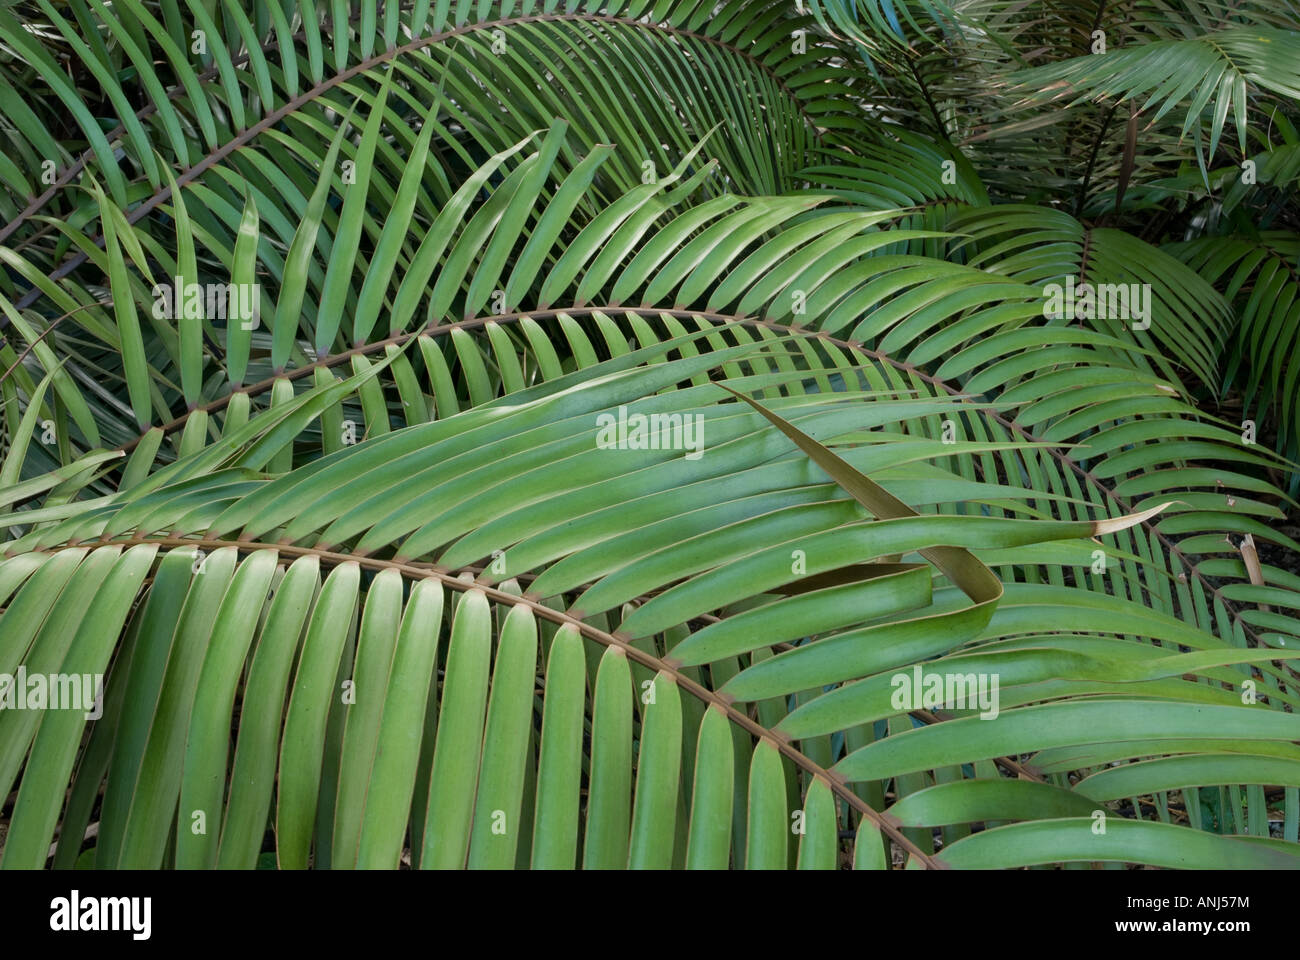 Ceratozamia leaf detail, type of Mexican cycad Stock Photo